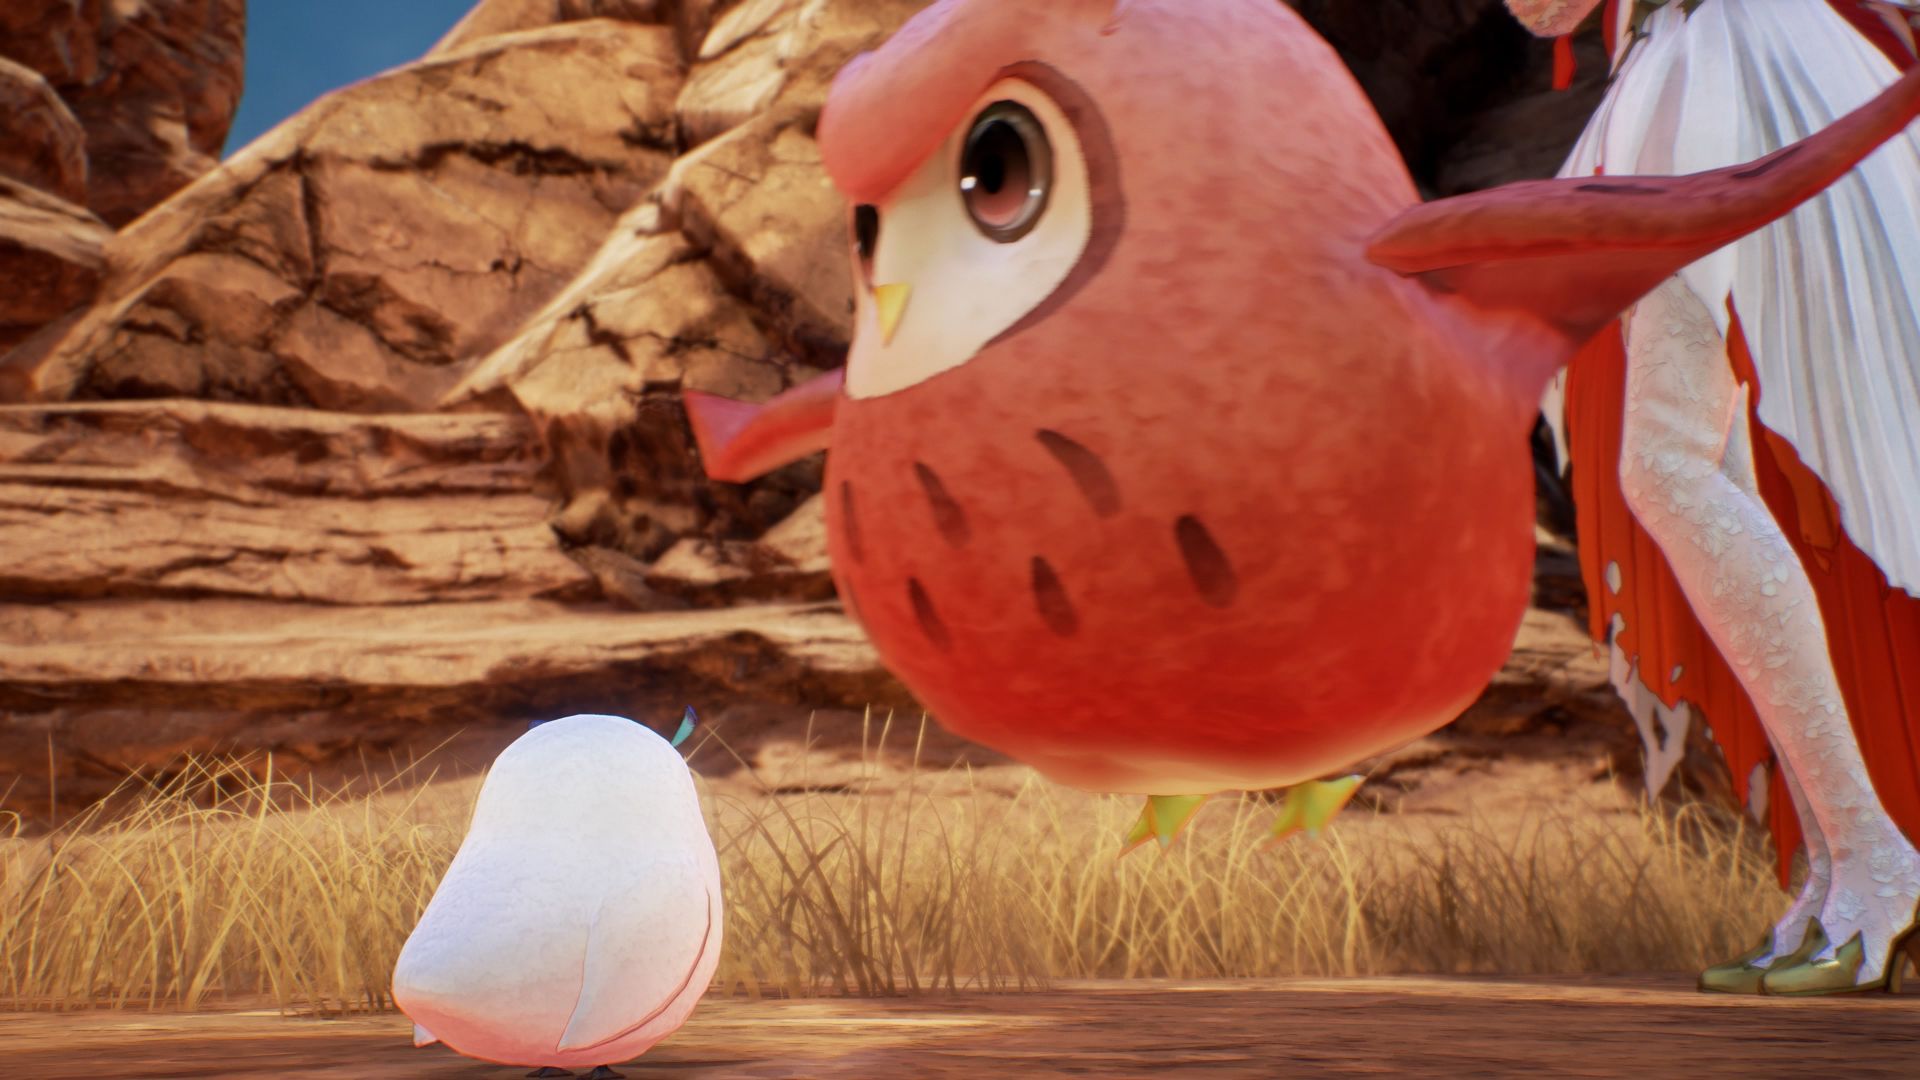 Tales of Arise Owls Hootle